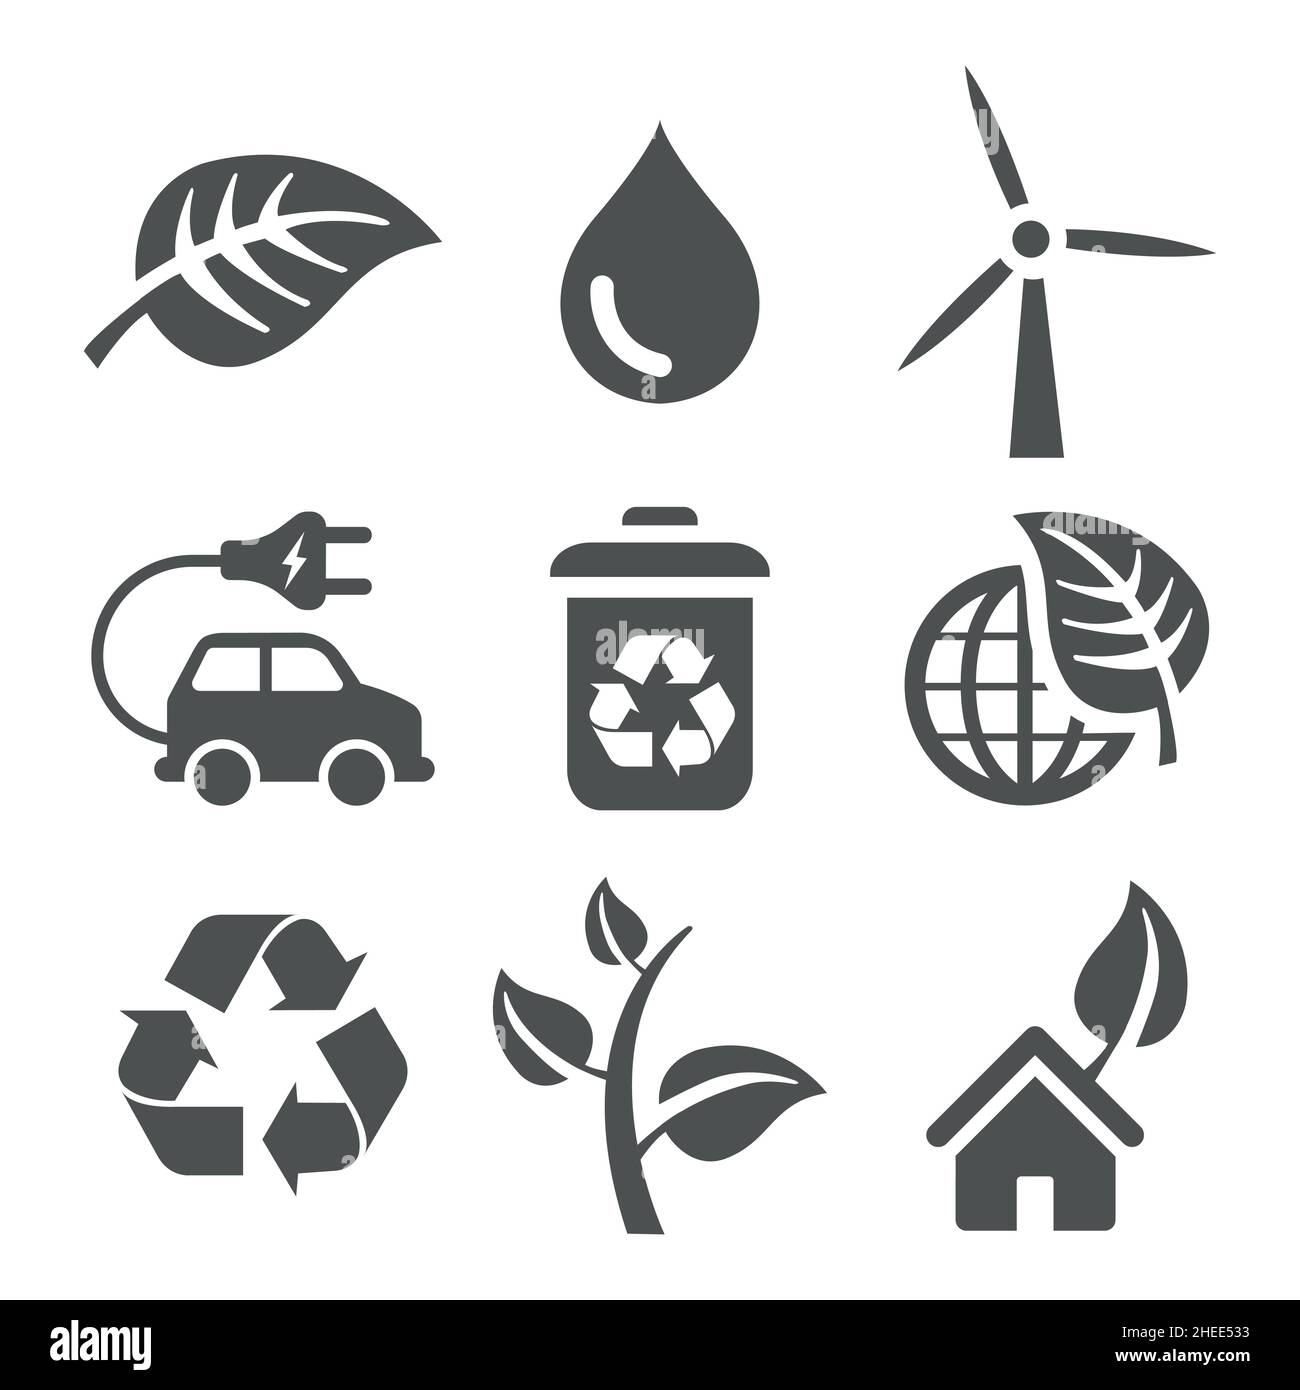 Ecology art icon set, nature and environment. Protection, planet care, natural recycling power. Vector ecology art illustration. EPS 10 Stock Vector